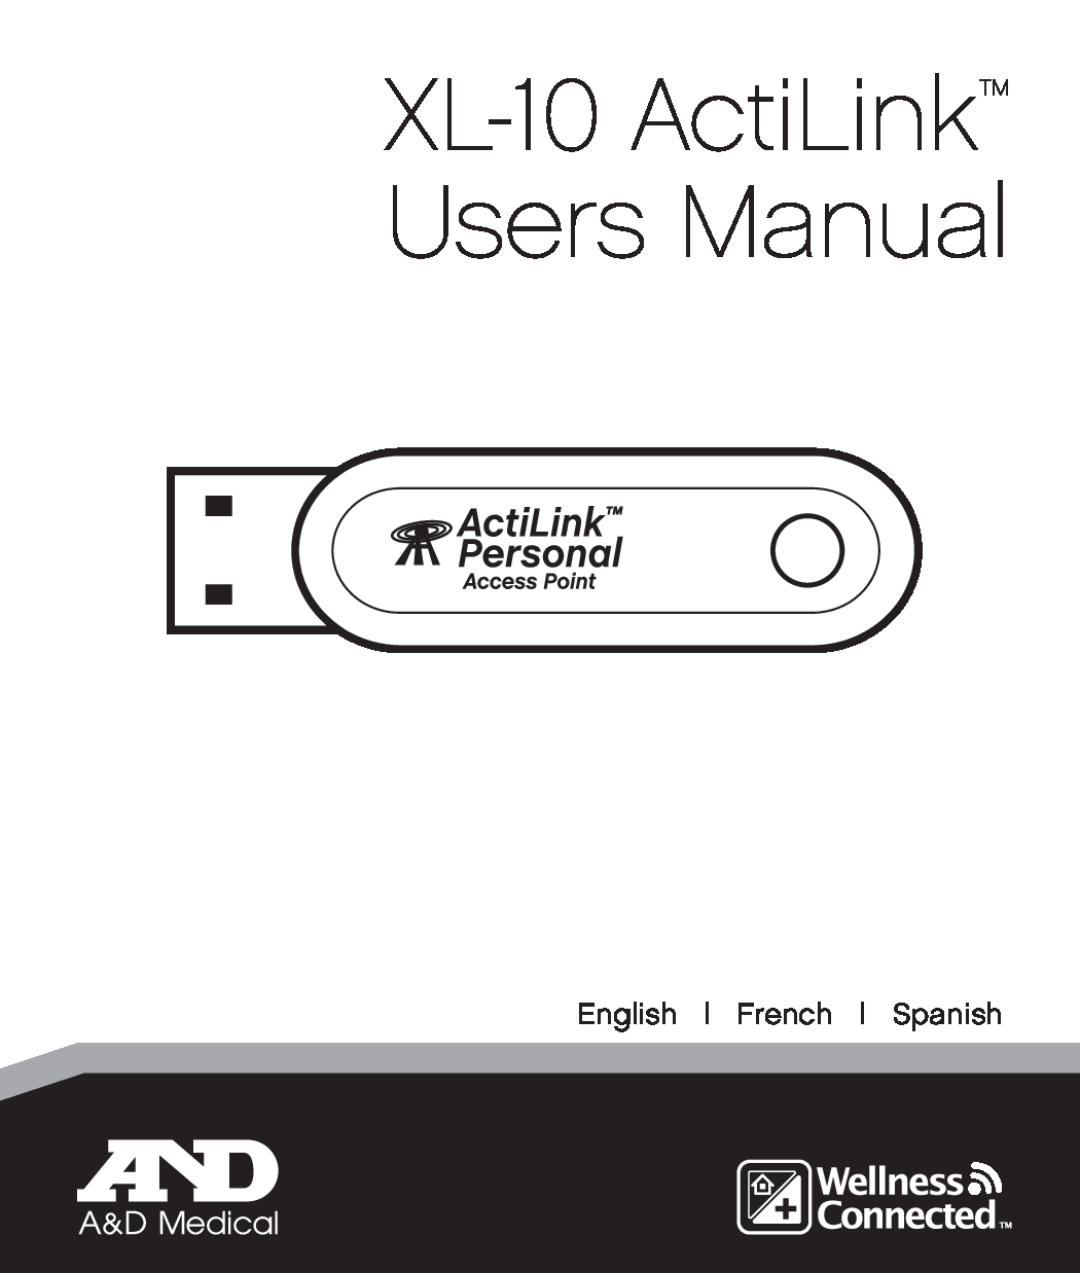 A&D user manual XL-10 ActiLink Users Manual, English French Spanish 